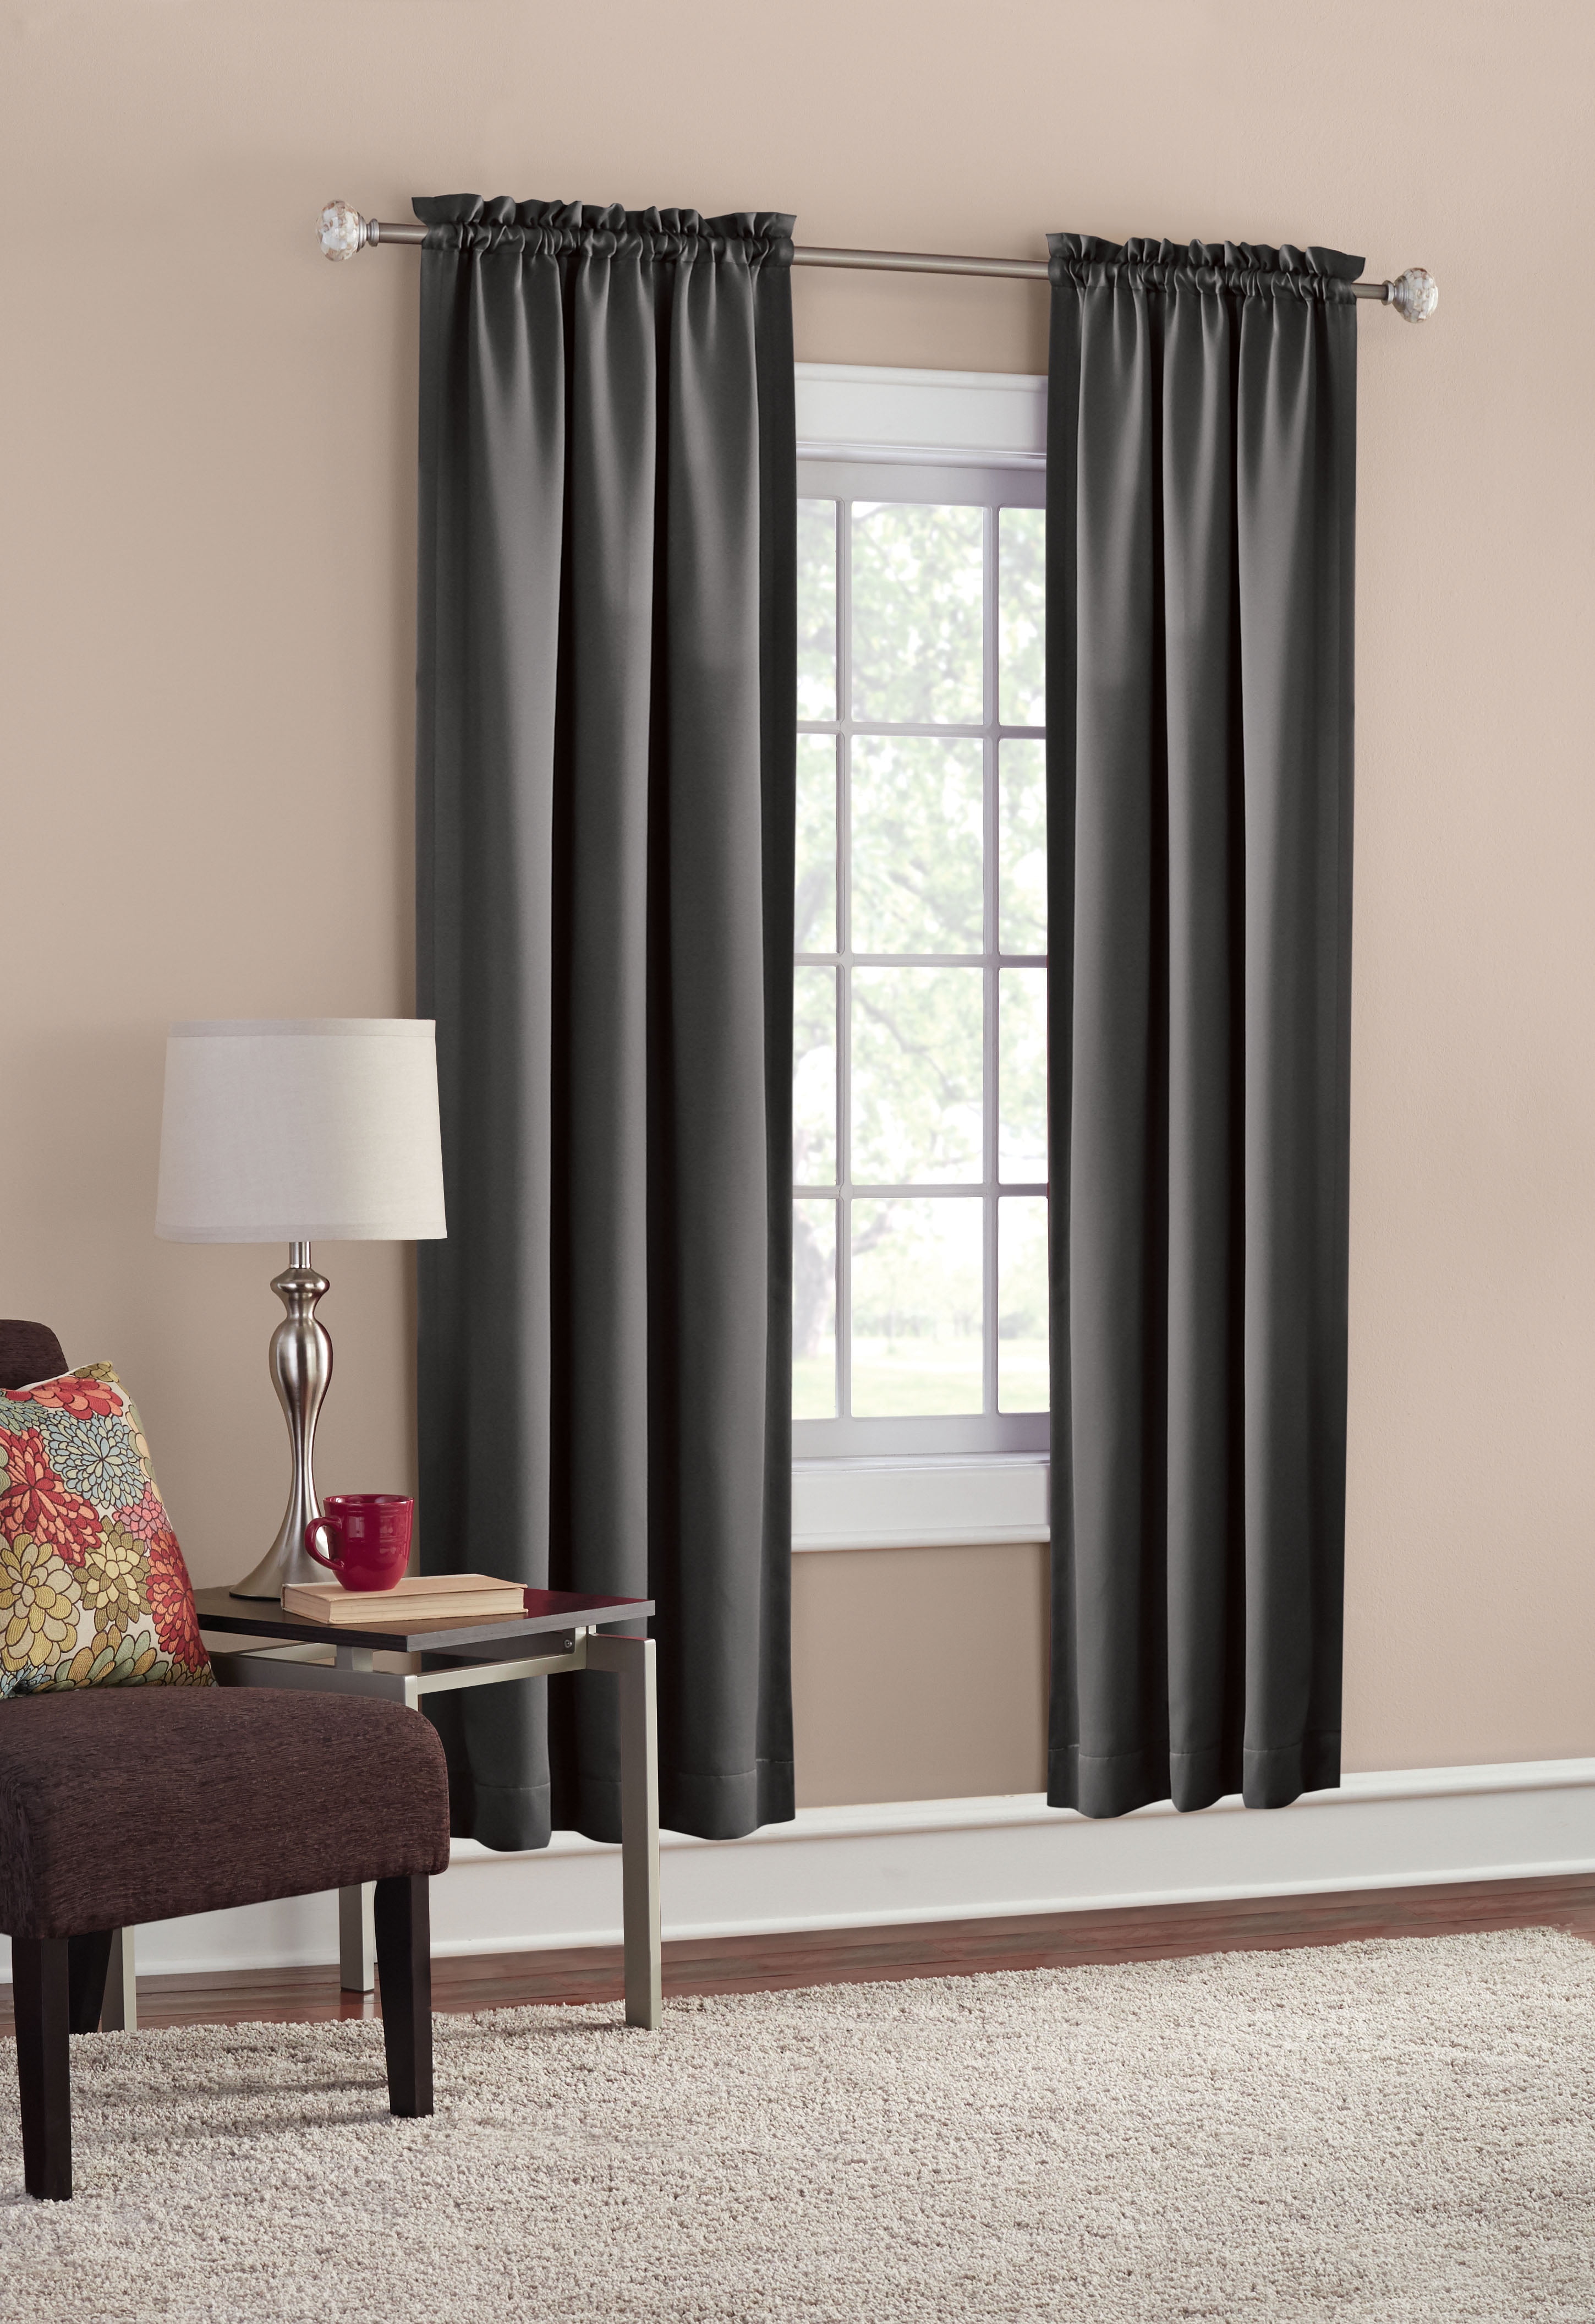 Window Curtain Treatment Drapes Blackout Panel With Grommets Rustic Western 2ct 